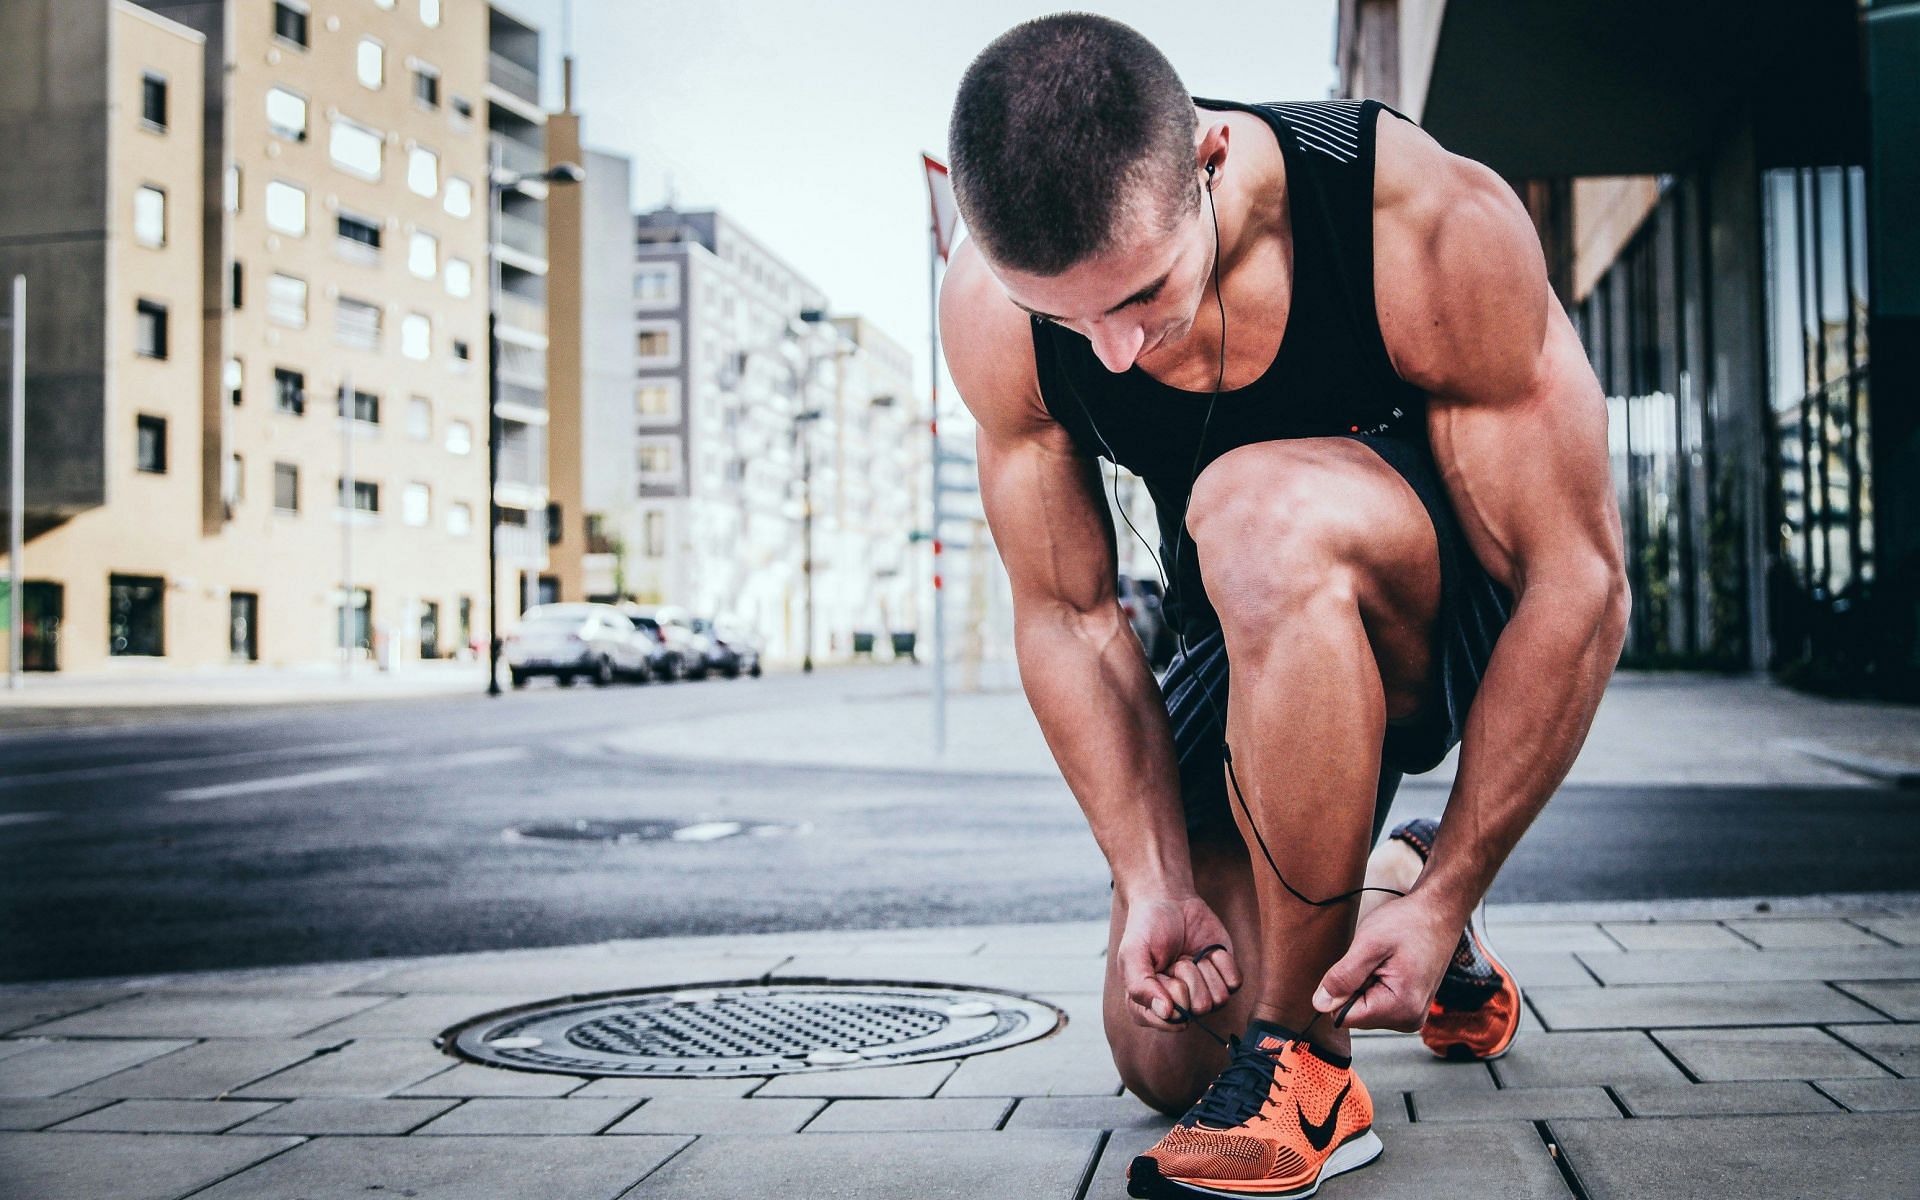 Cardio is an important part of this workout (Image by Alexander Redl/Unsplash)